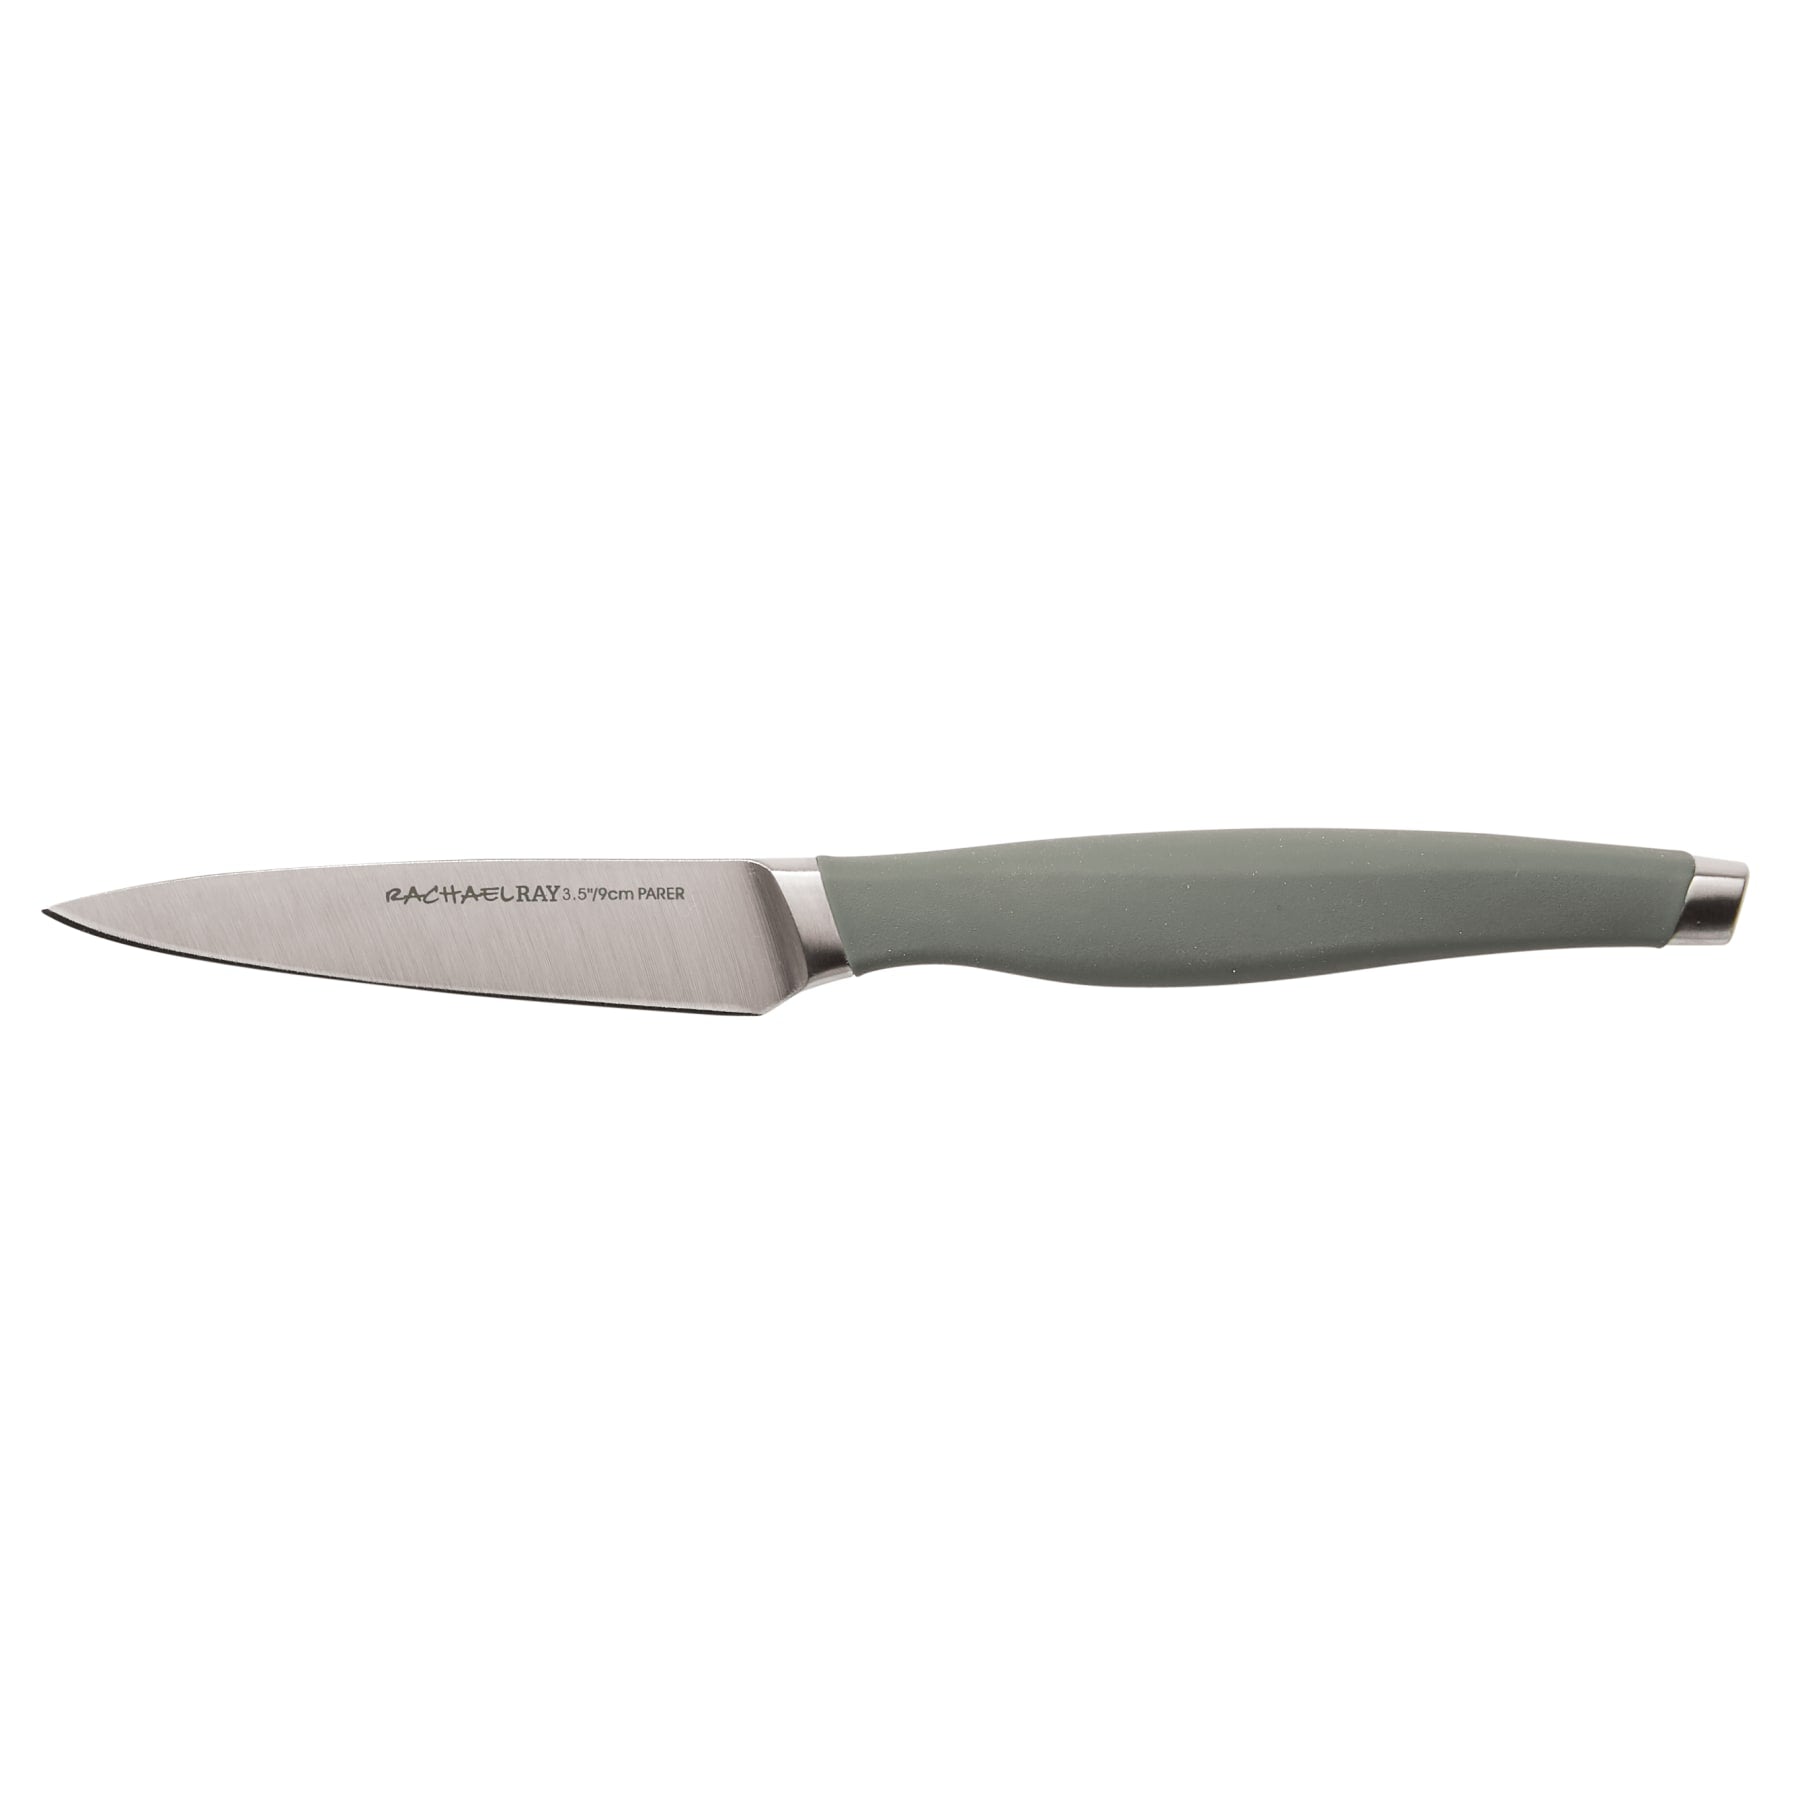 Rachael Ray Cucina Japanese Stainless Steel Knife Kitchen Cutlery